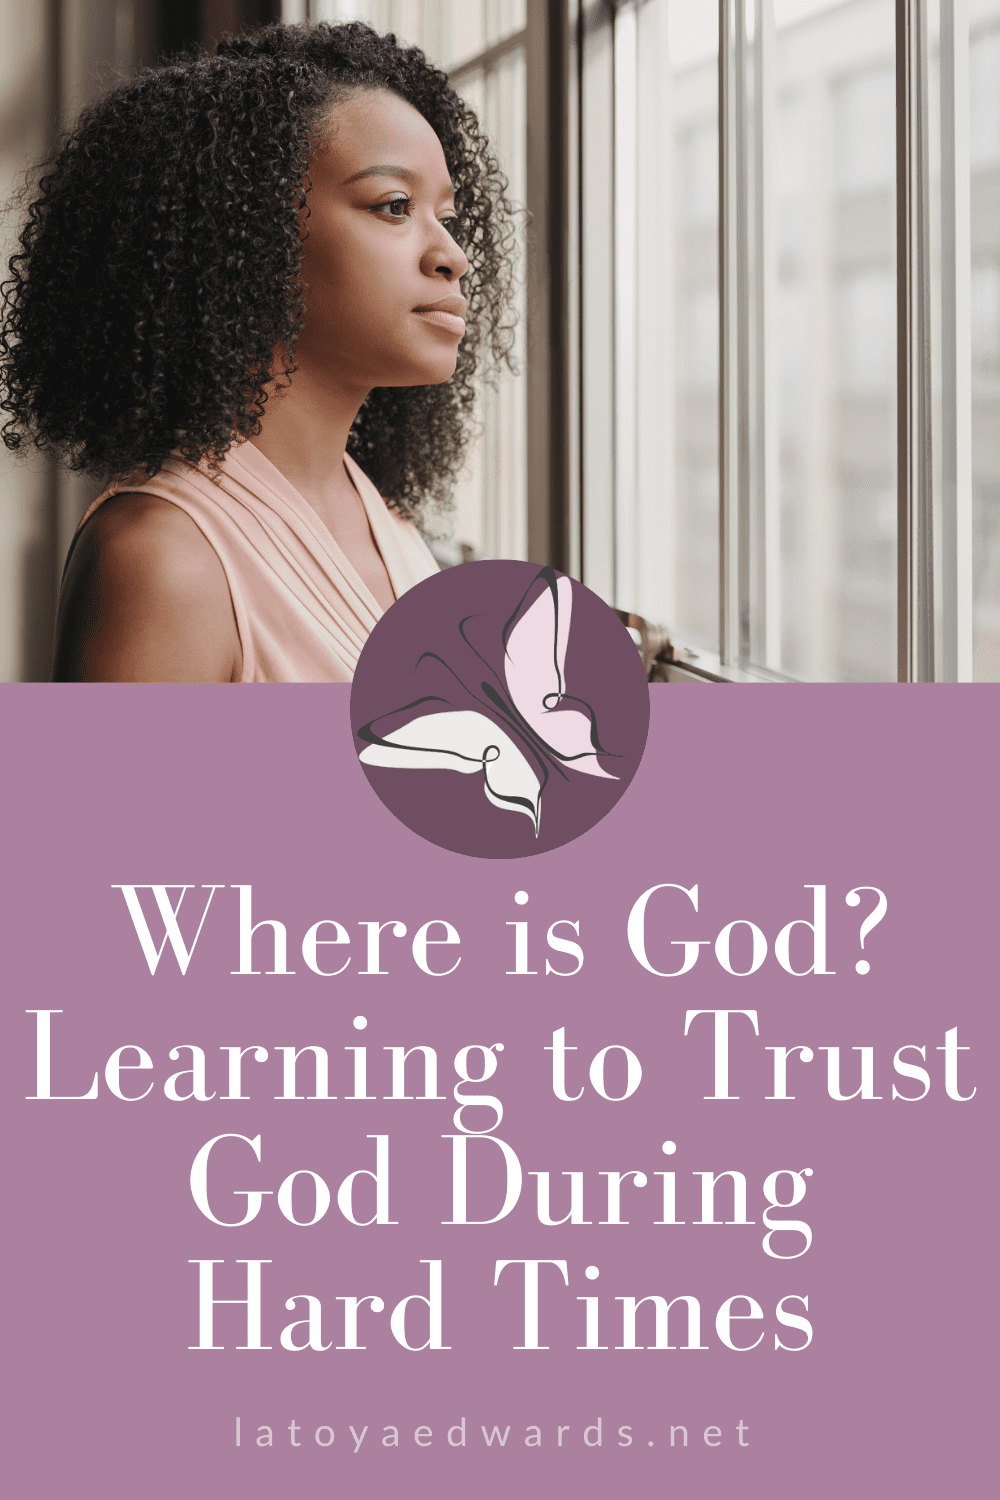 It's easy to feel forgotten when you're waiting on God's timing. You ask, "Where are you God?" because it seems like he isn't listening to your prayers. Learning to trust God during hard times often involves asking these hard questions. Learn how the Trinity holds an answer to this question that will help you get closer to God and manage your emotions better.